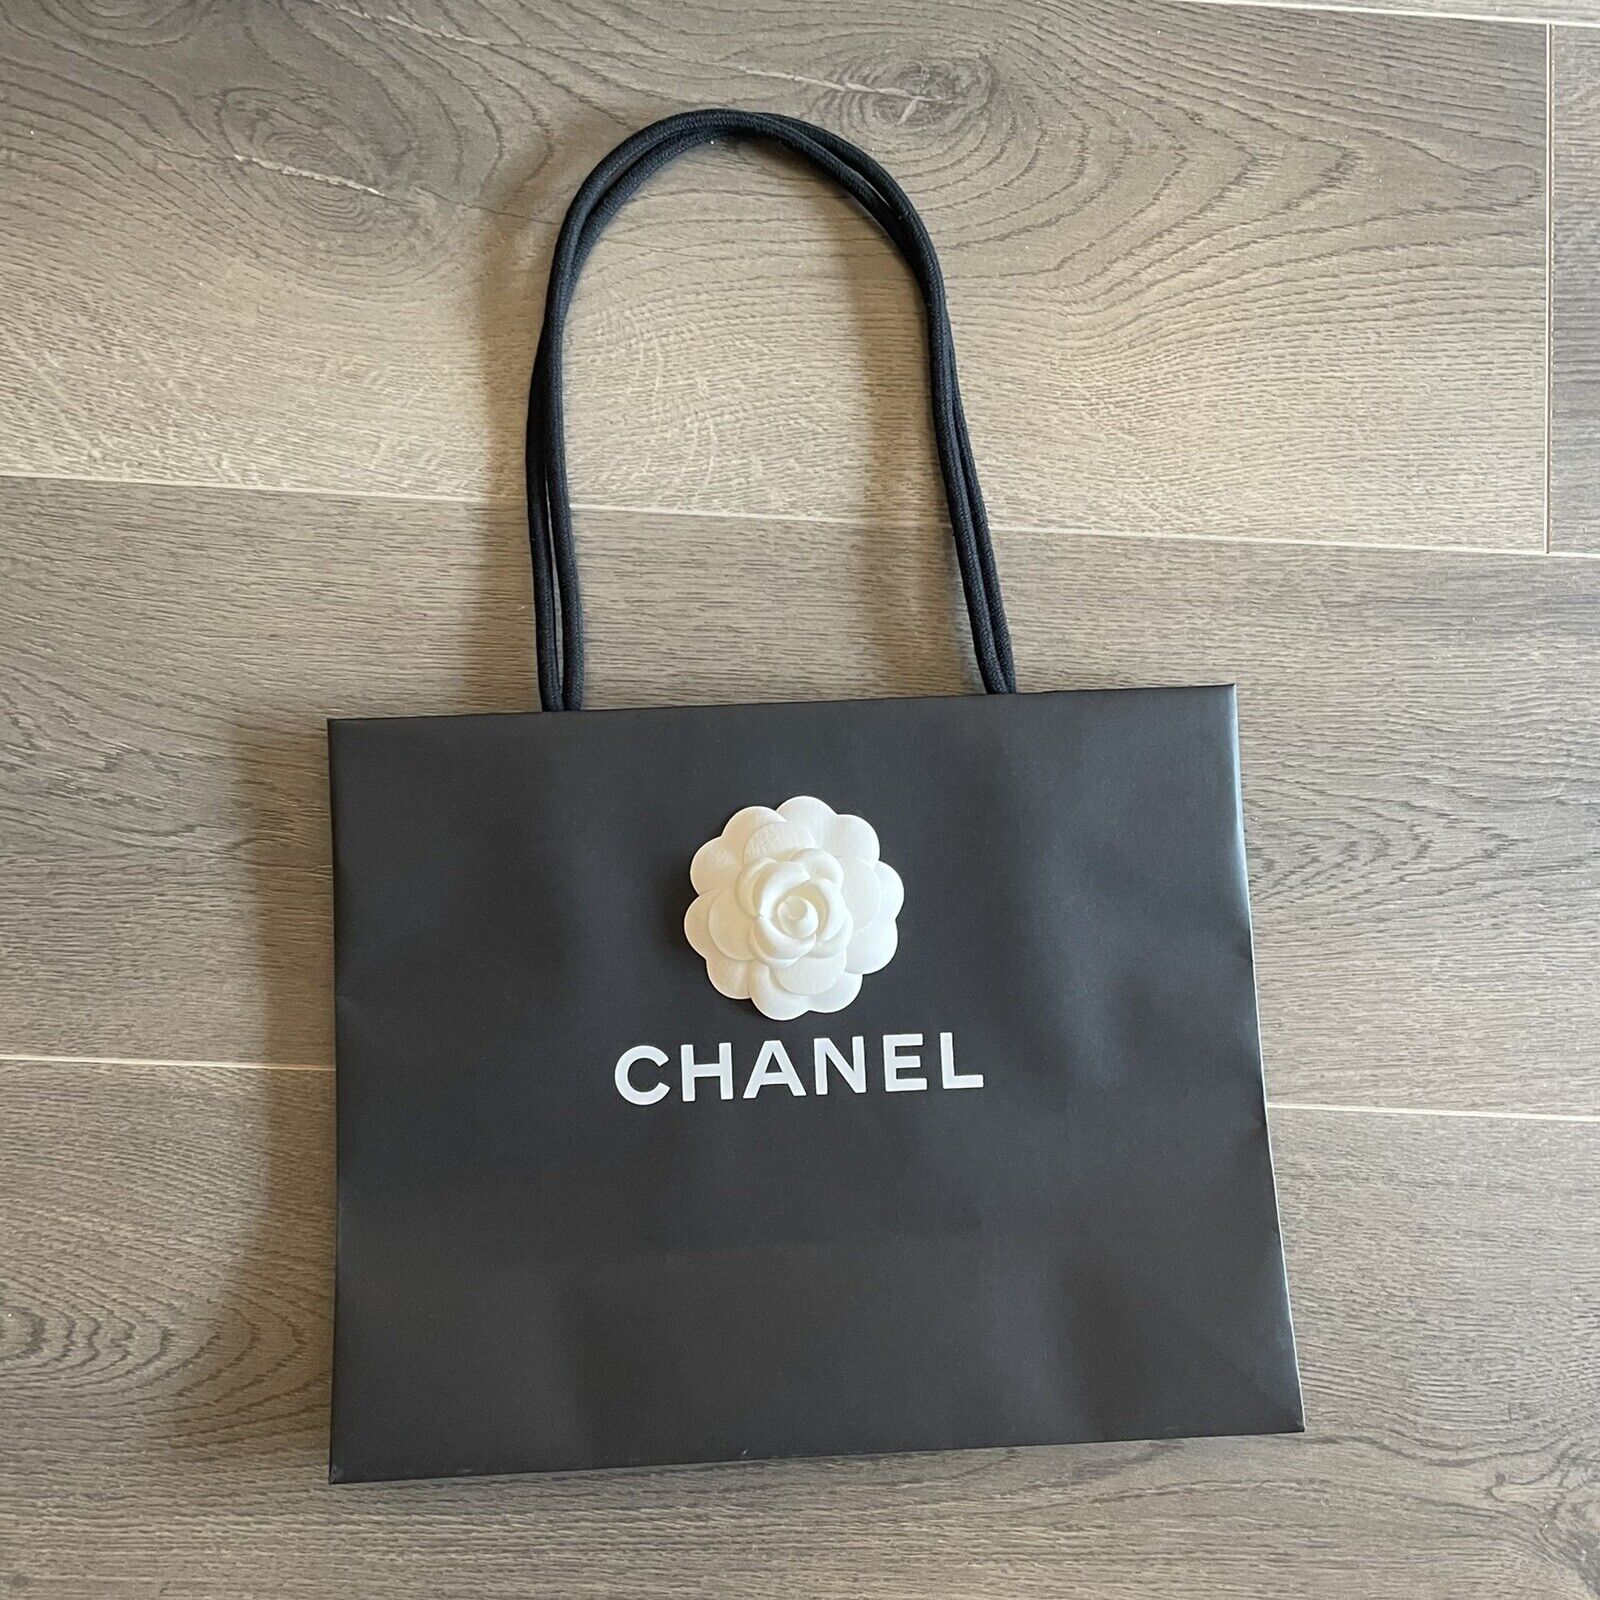 Authentic Chanel Shopping Bag with flower 12”x9 camelia Don't miss the Ranking TOP20 campaign - Medium